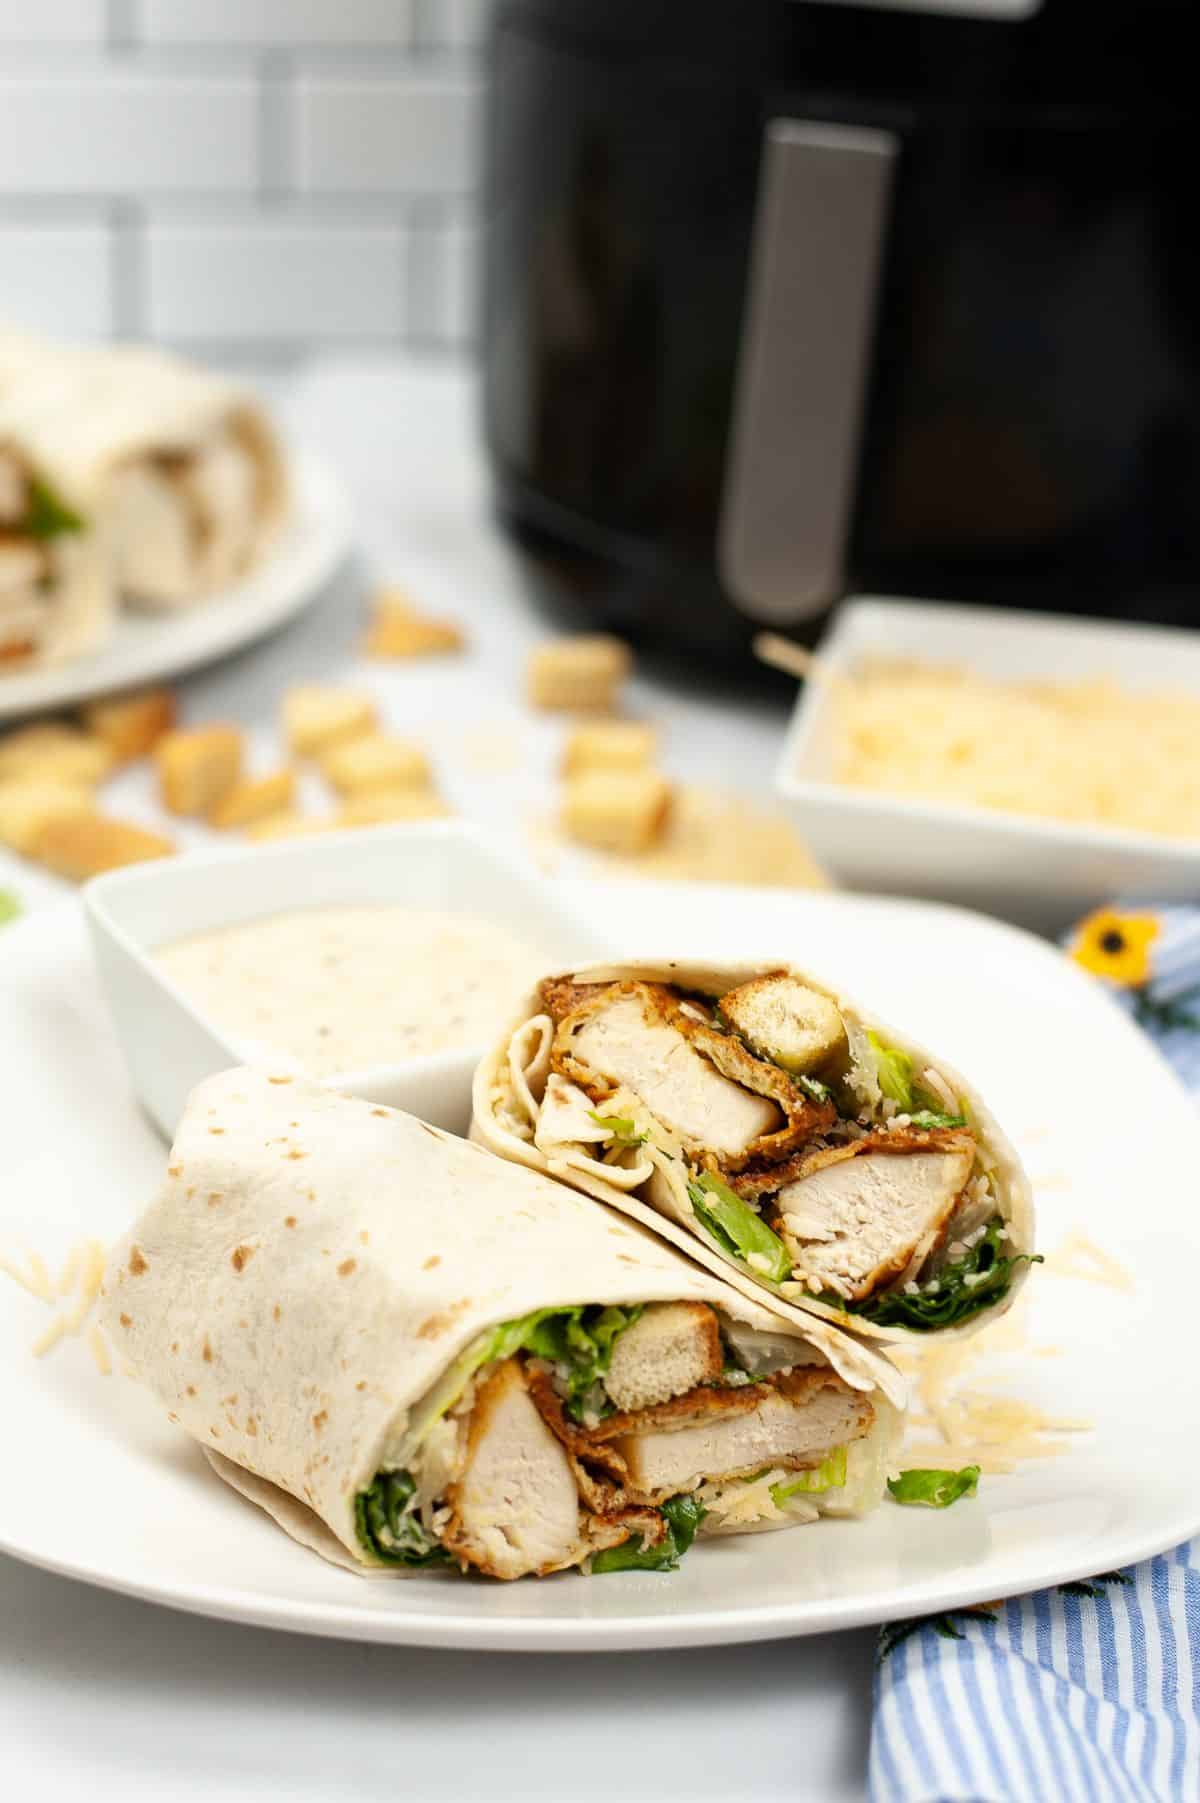 Fried Chicken Wrap on a serving plate with Caesar dressing and Air Fryer on the side.